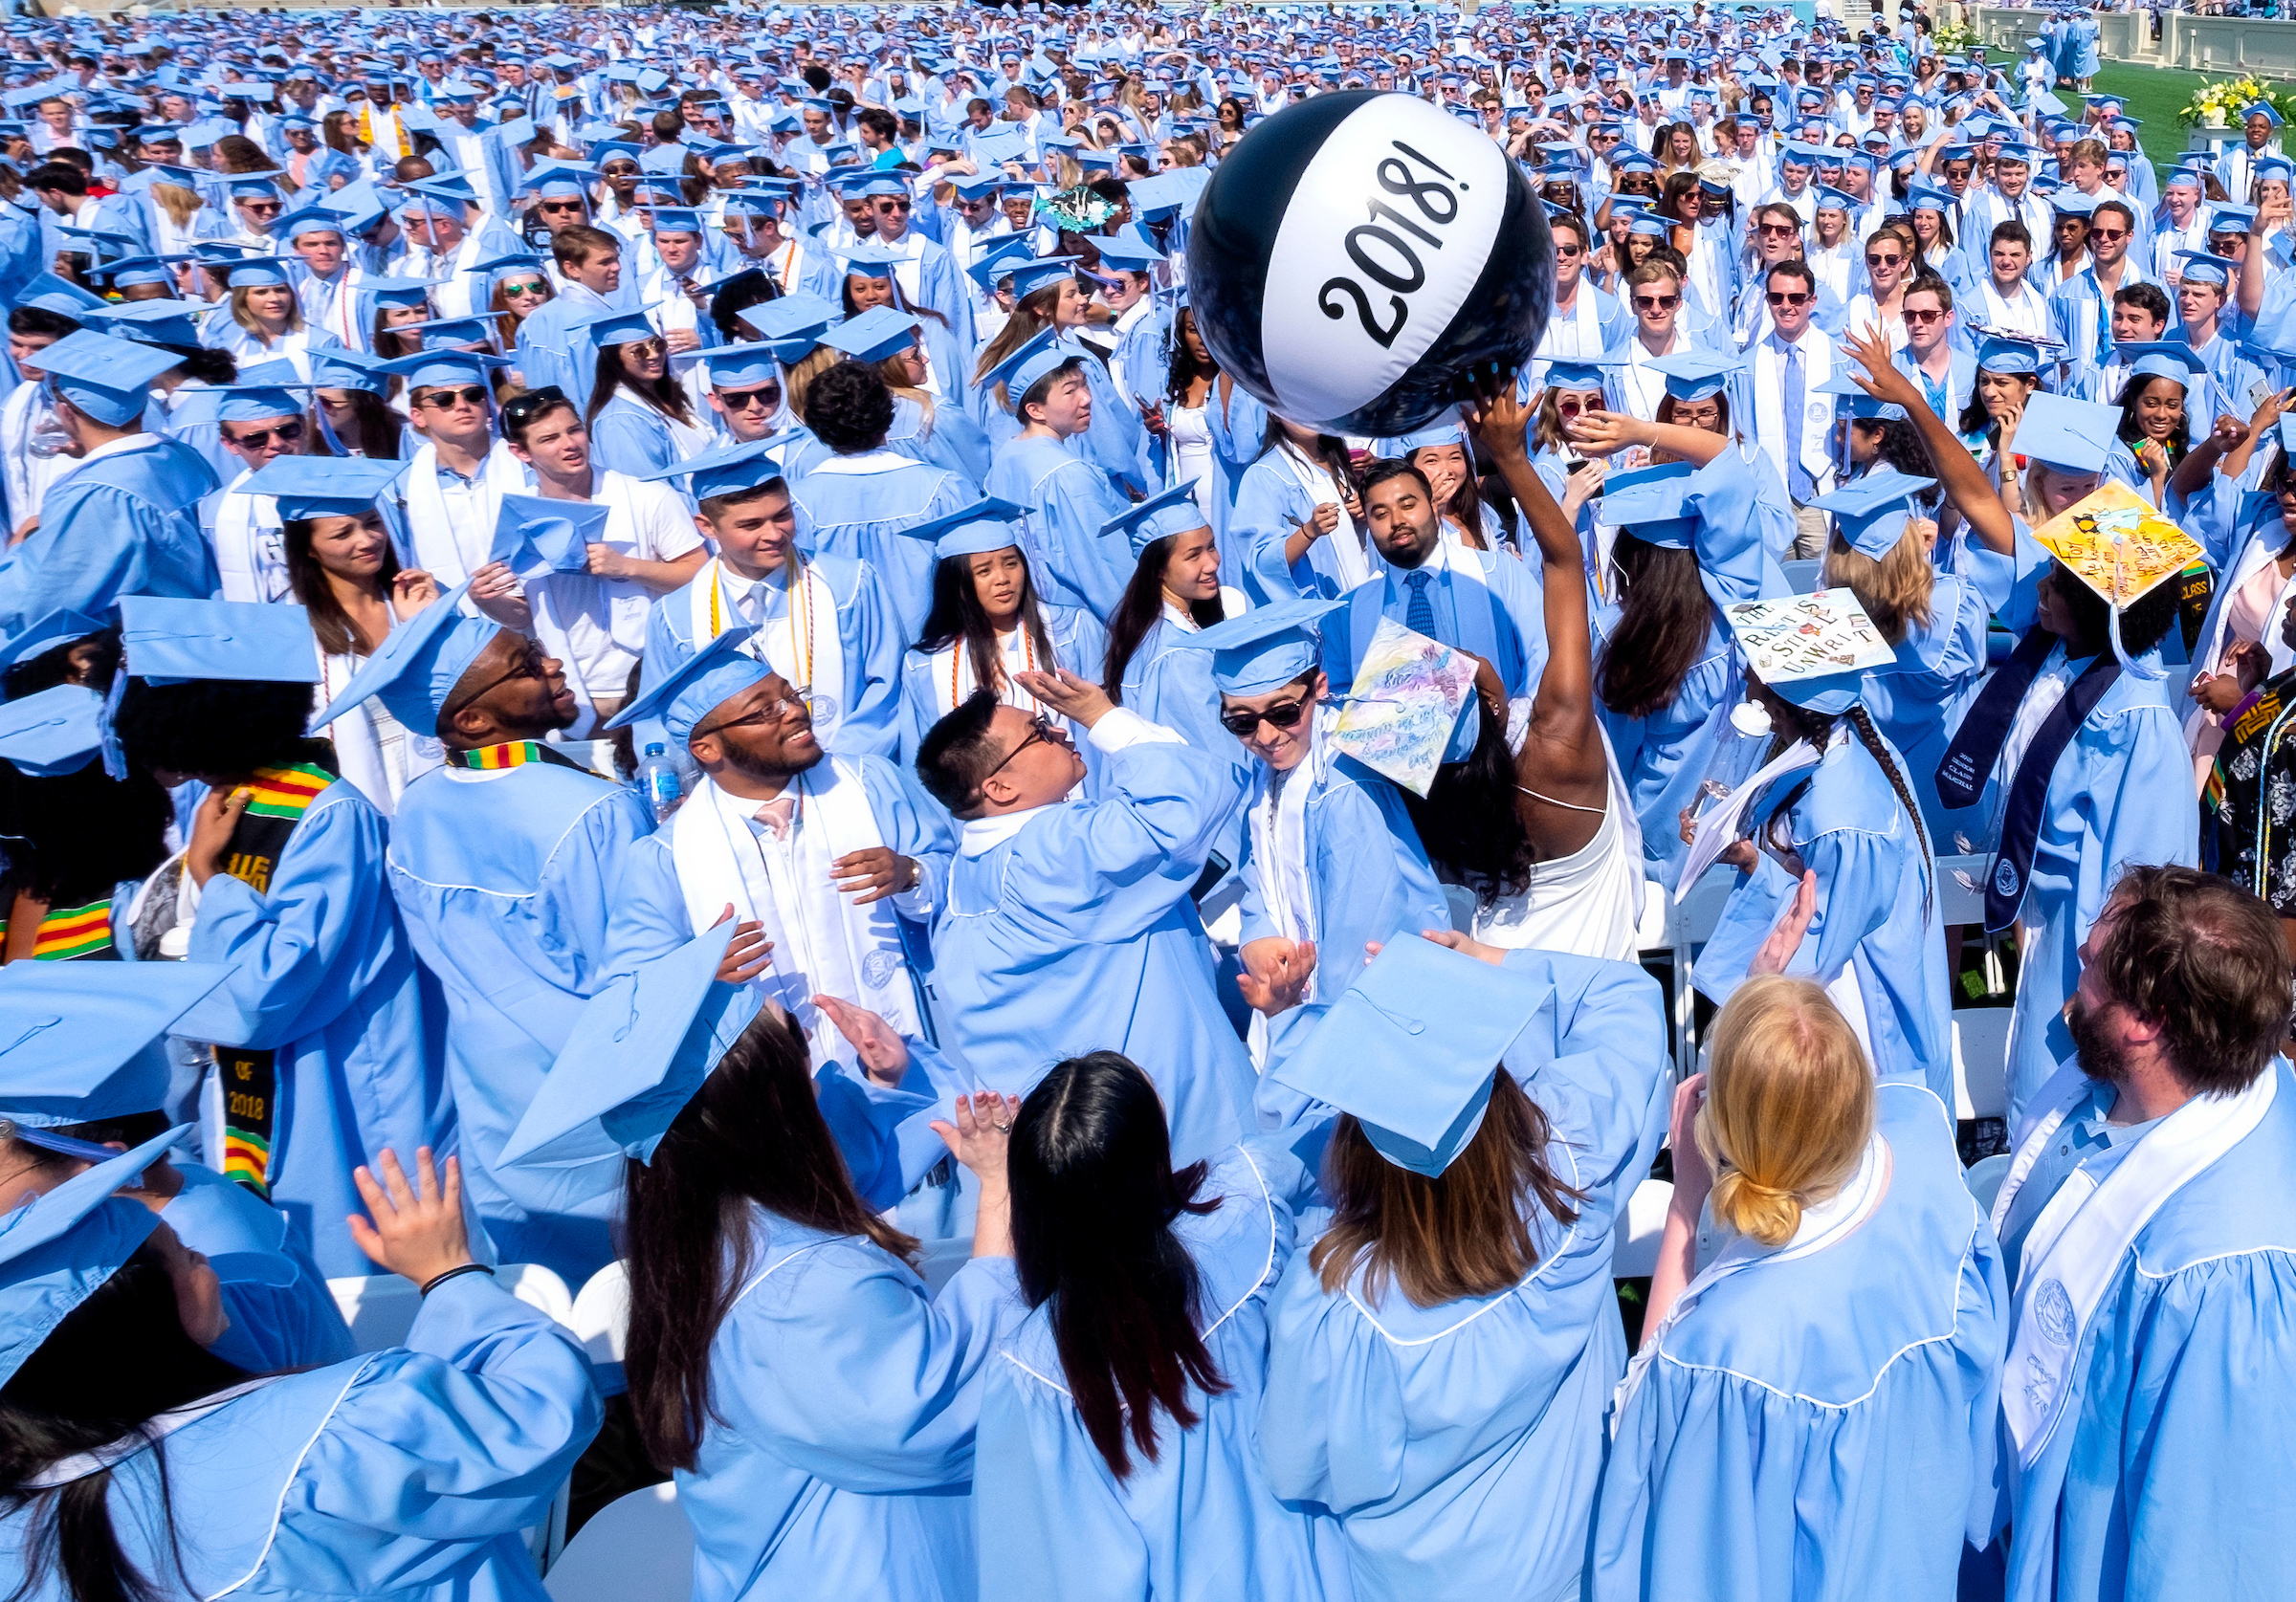 Photo shows the class of 2018 in Carolina blue caps and gowns tossing a black ball in the air that says 2018 on it and the UNC 2018 graduation ceremony.